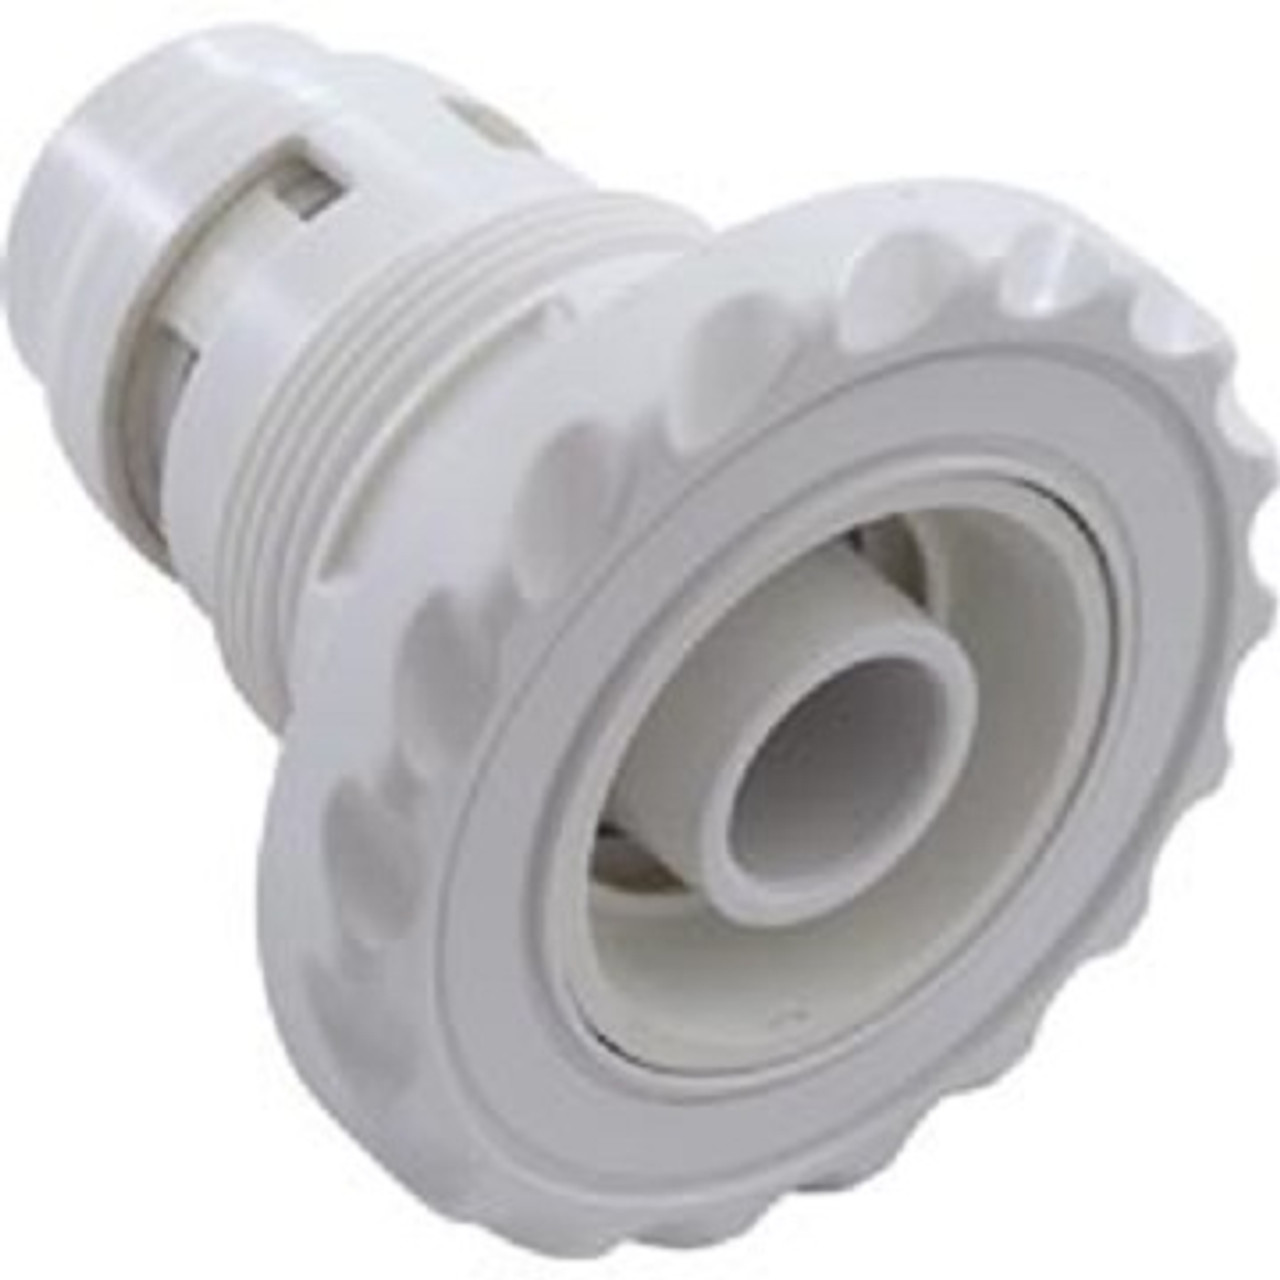 CMP, Custom Molded Products, 25591-210-000, 210-6080, 849640016367, Poly Jet, Internal, White, Super, Pro, Scalloped, Directional, Spa, Hot Tub, _25591-210-000 , 210-6080 , 2106080 , 25591210000 , 611405 , 806105021465 , 904040 , WWP2106080